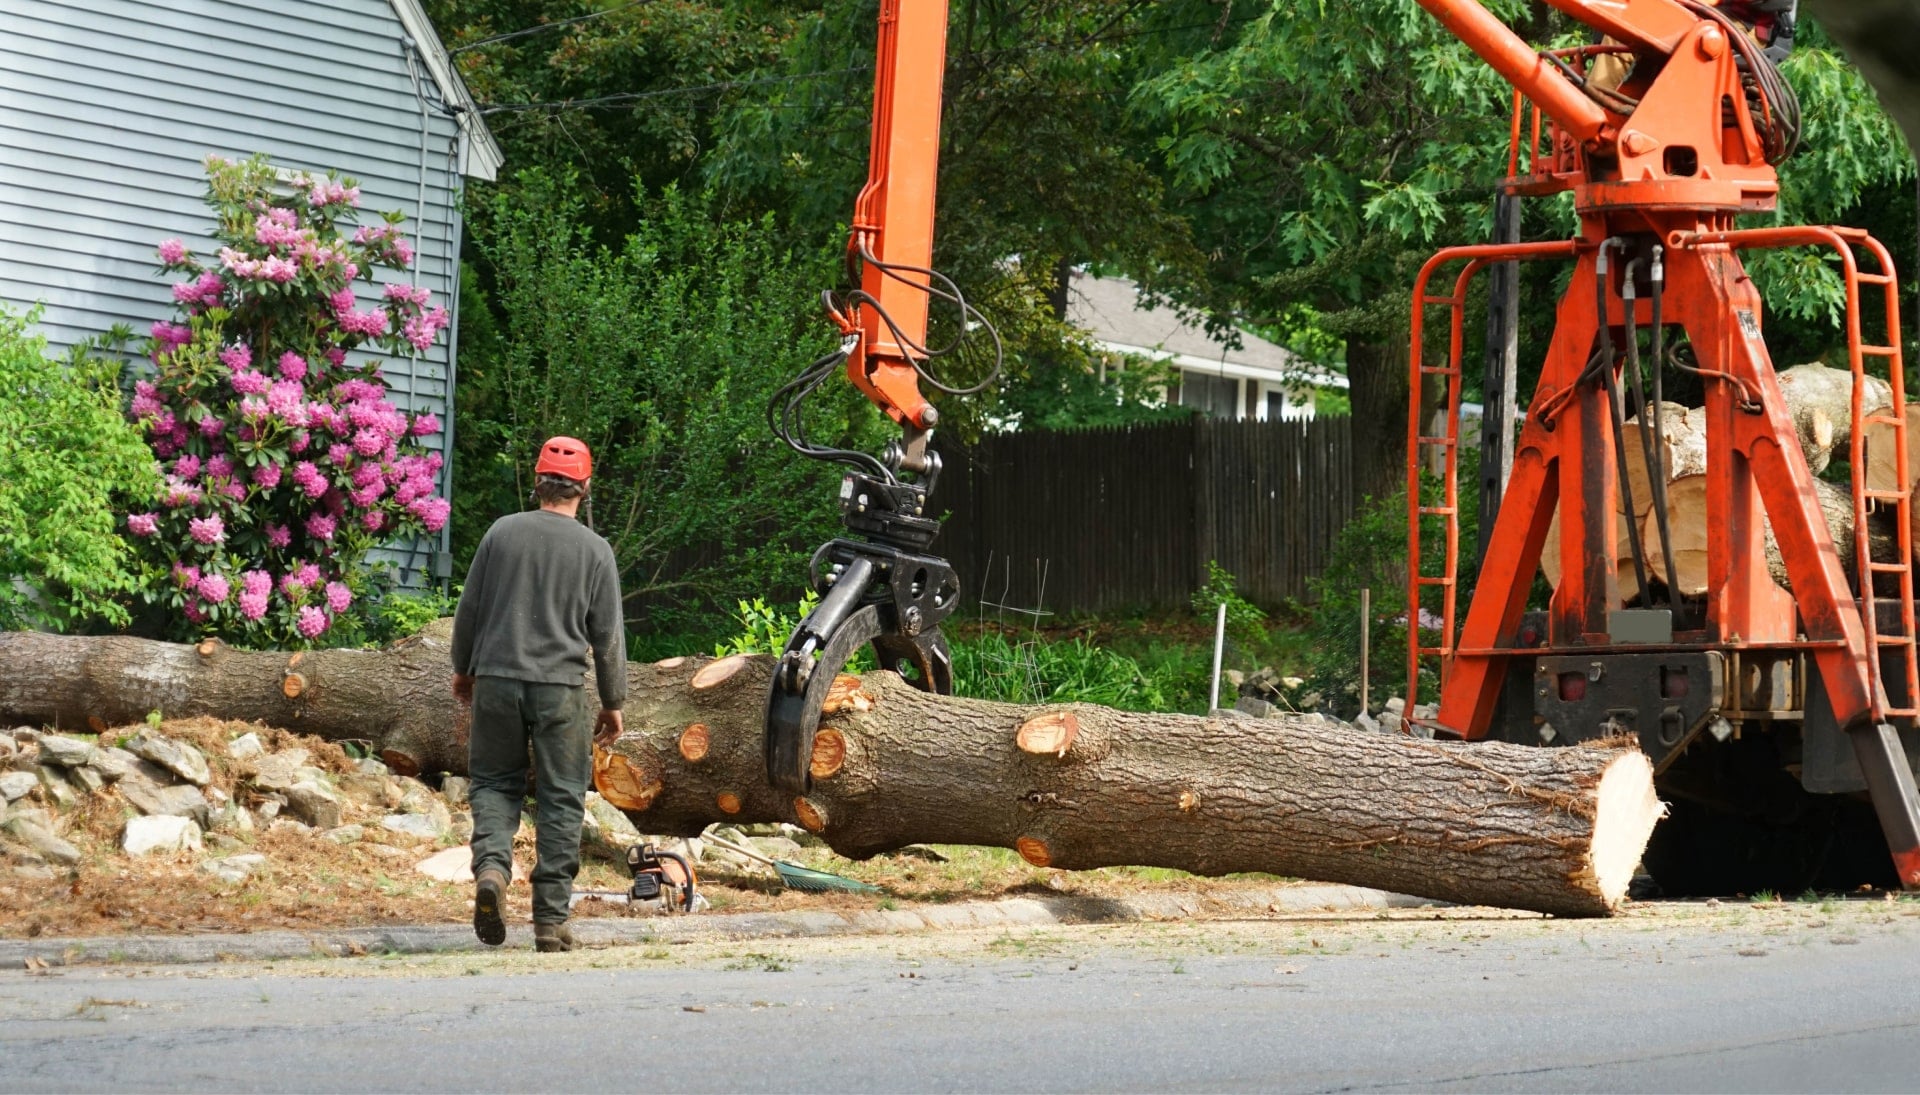 Local partner for Tree removal services in Omaha